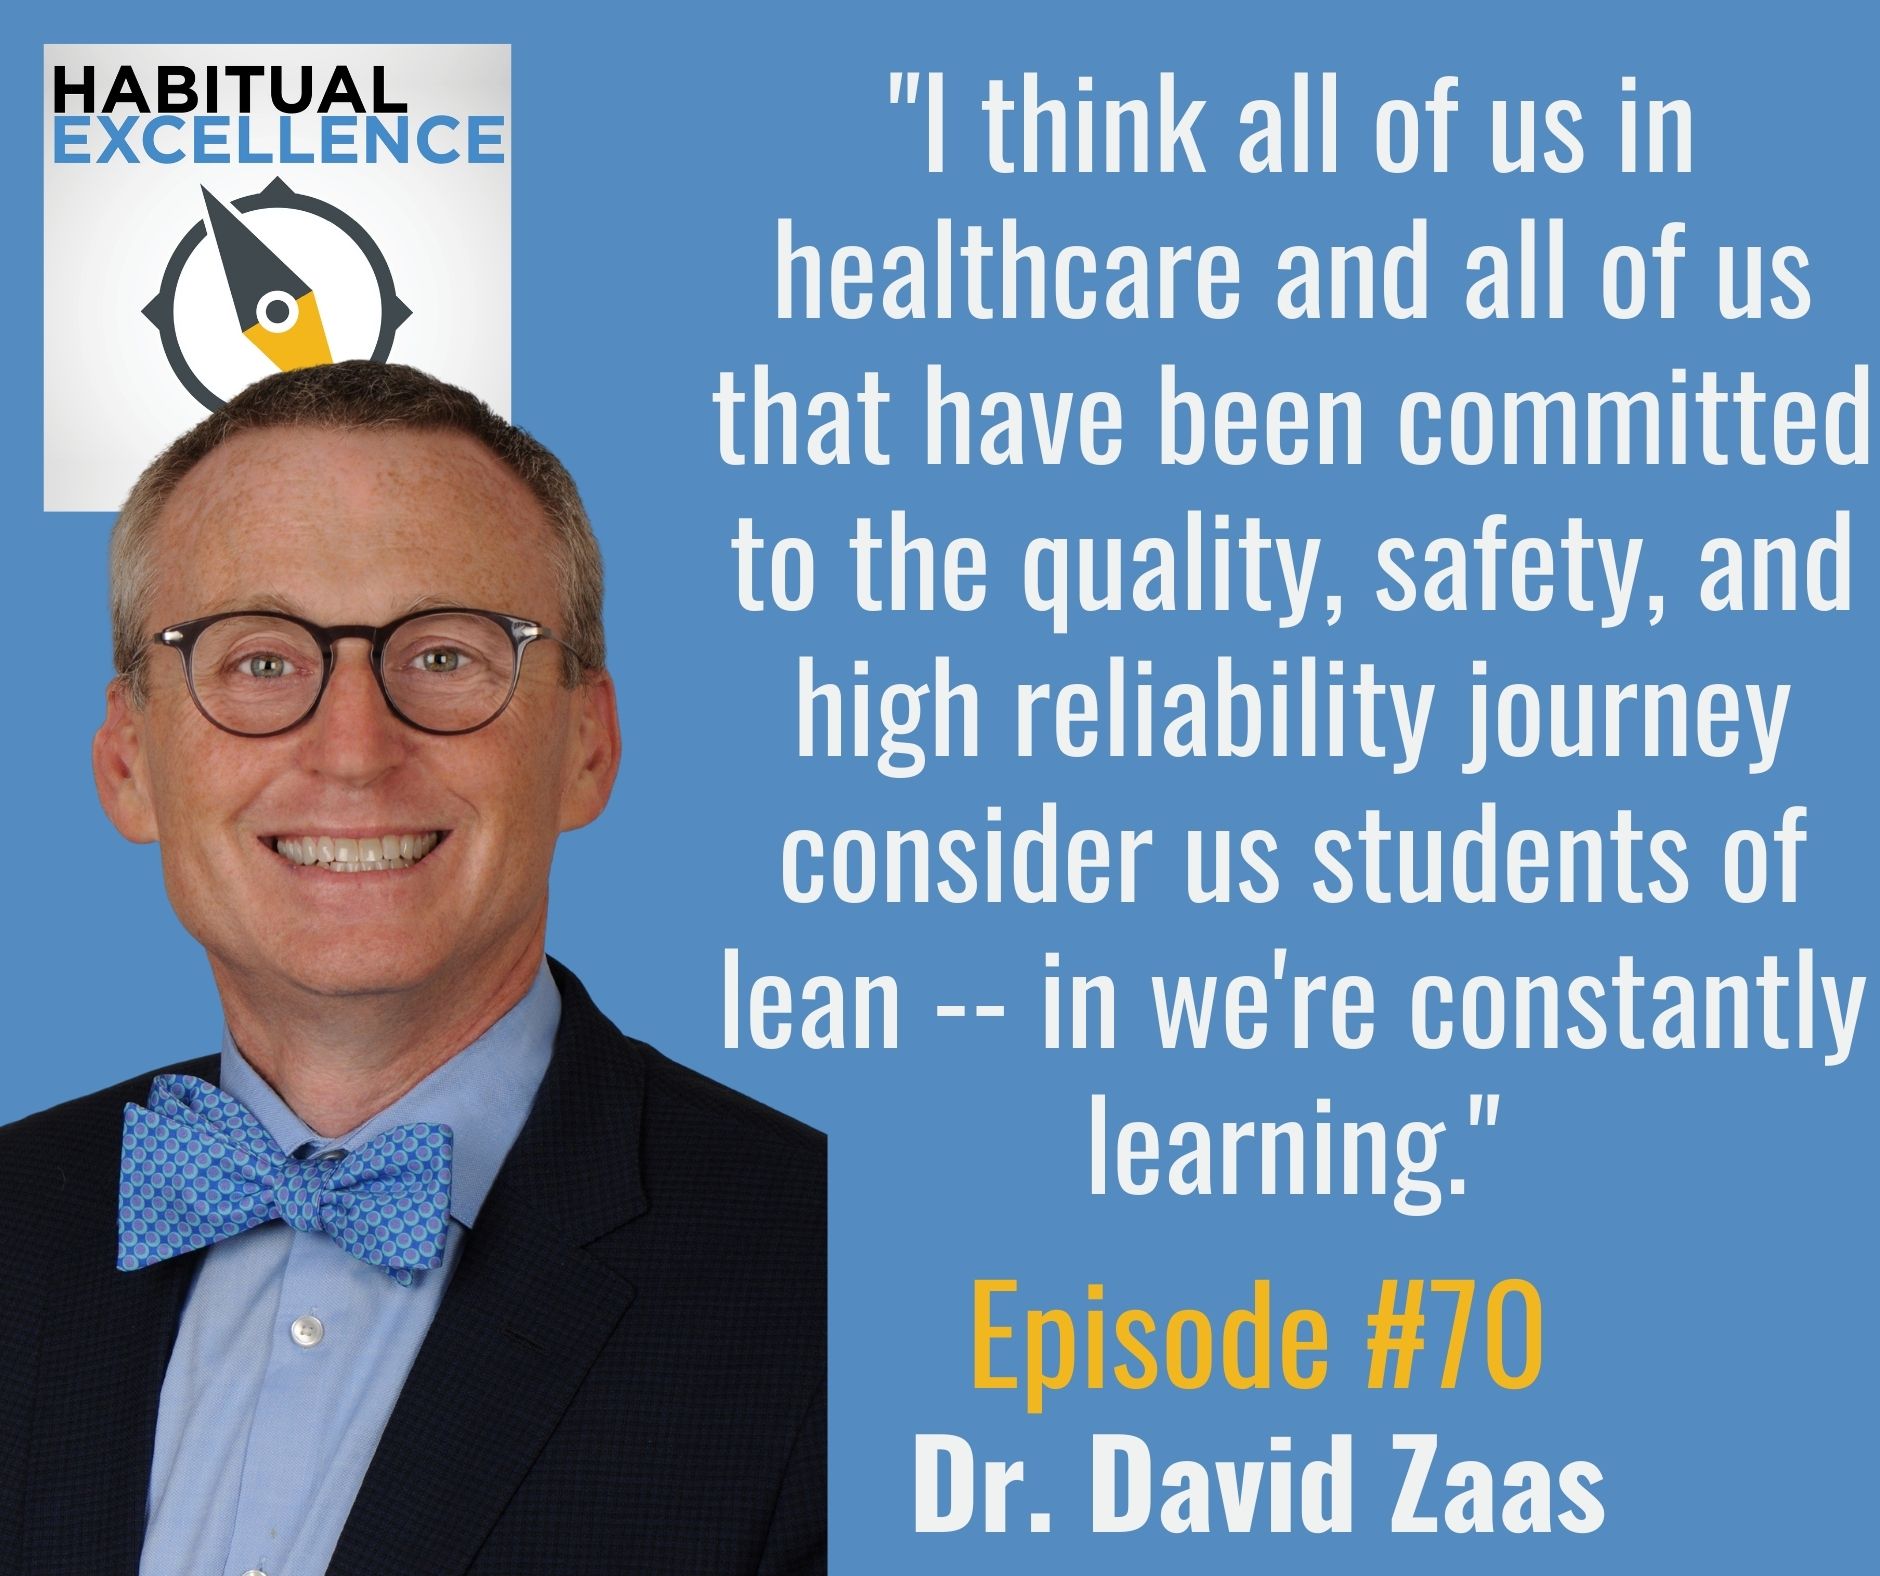 "I think all of us in healthcare and all of us that have been committed to the quality, safety, and high reliability journey consider us students of lean -- in we're constantly learning."